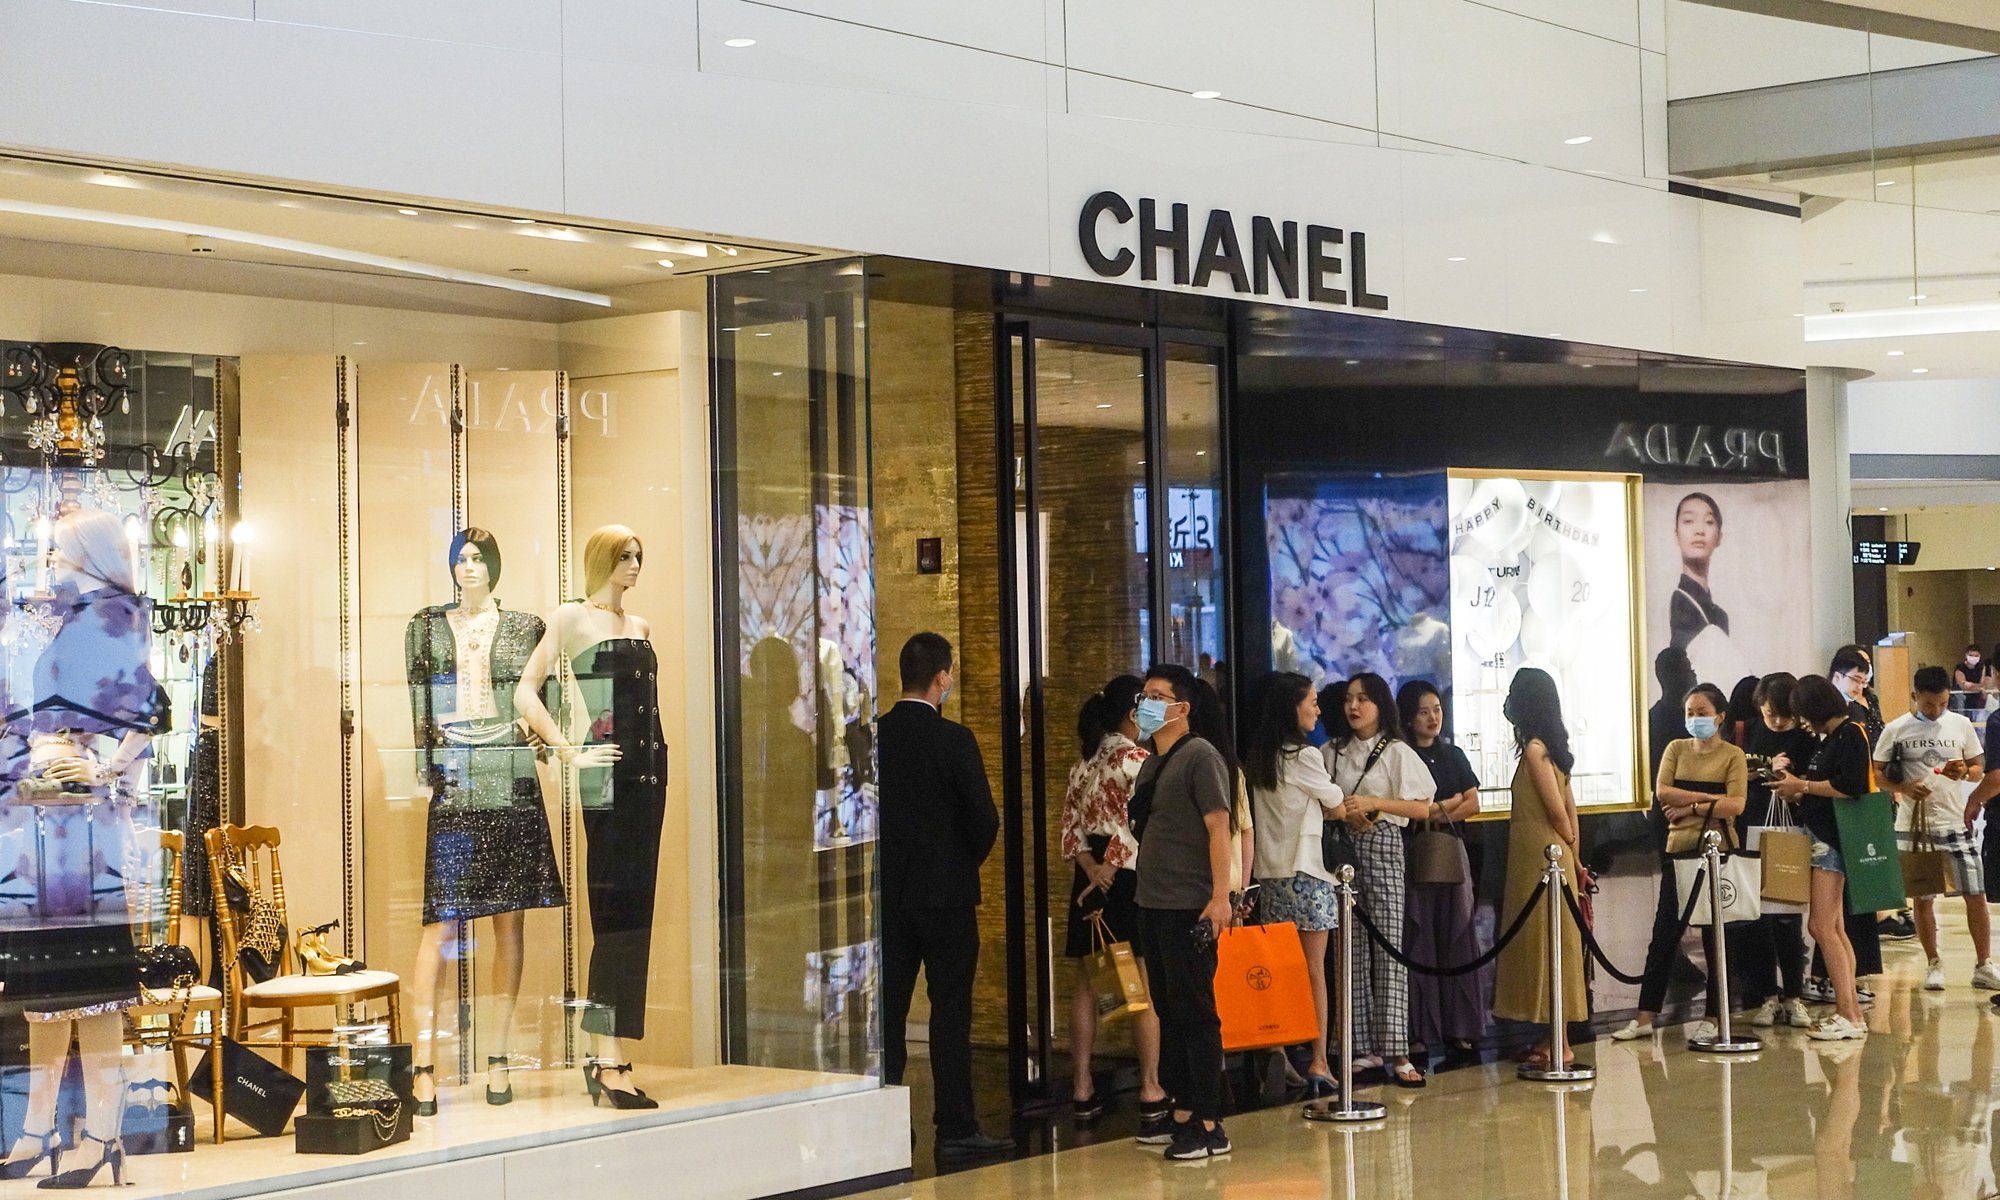 55% of New Luxury Store Openings were in China in 2021